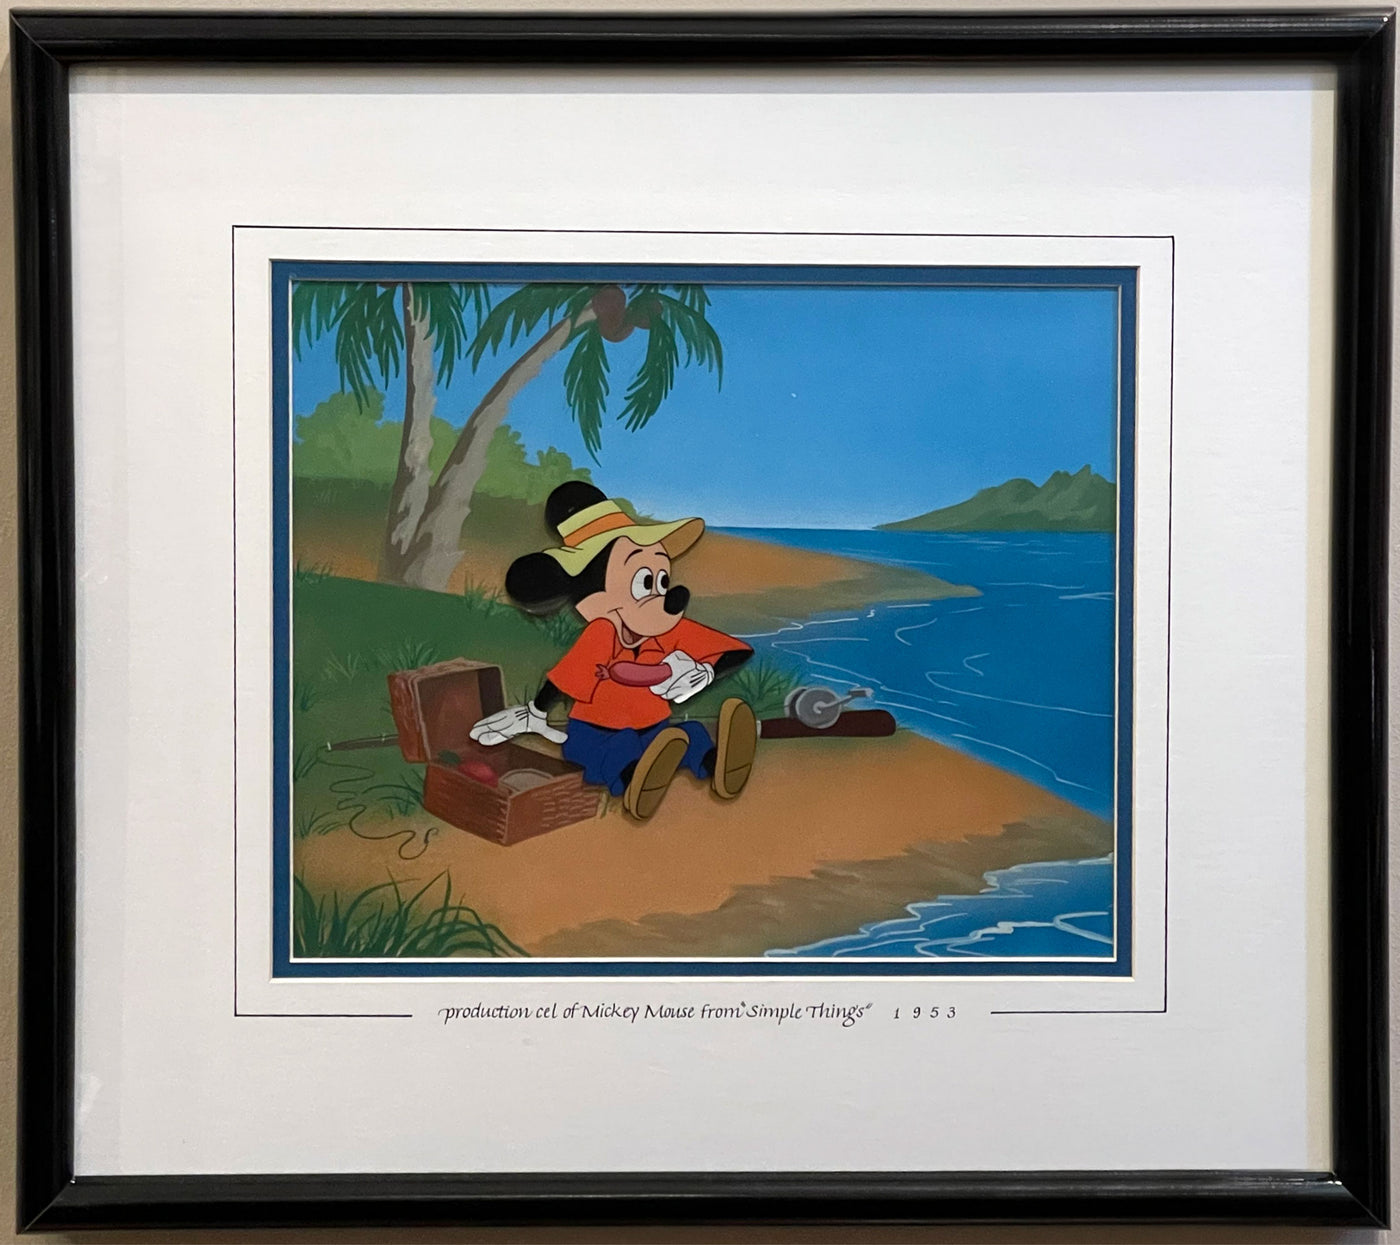 Original Walt Disney Production Cel on a Color Copy Background featuring Mickey Mouse from Simple Things (1953)